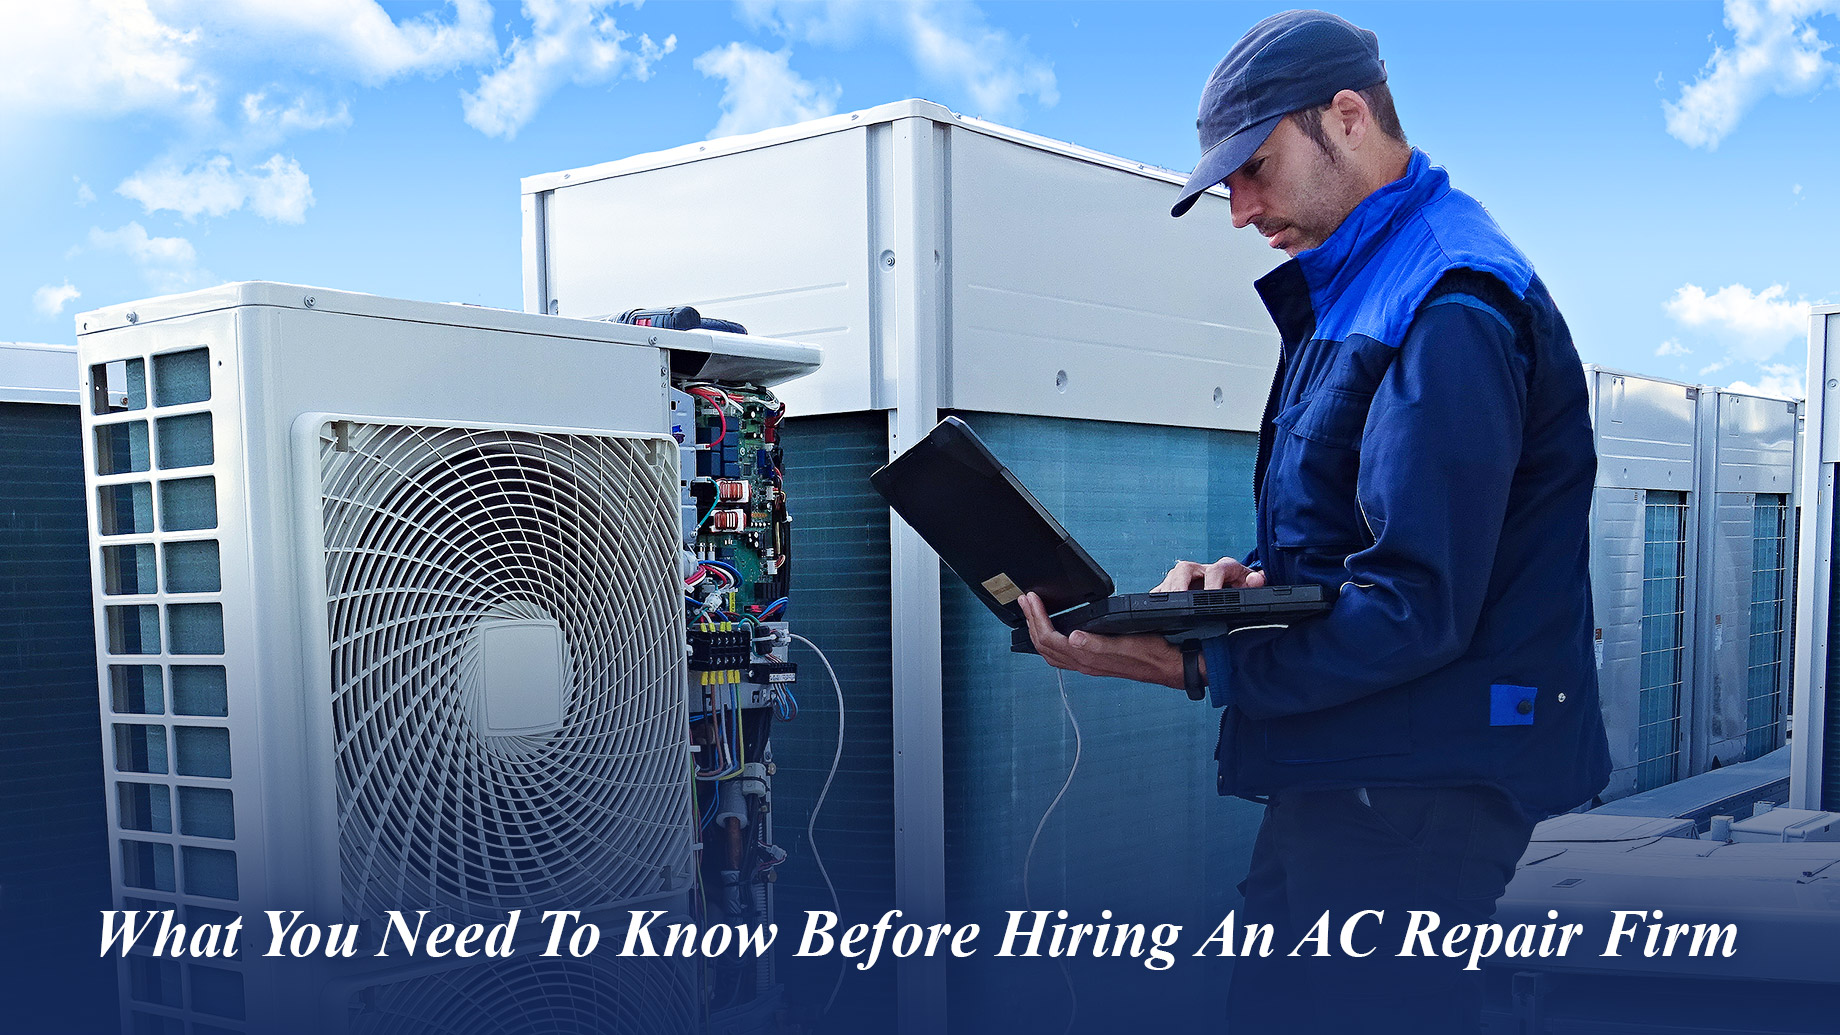 What You Need To Know Before Hiring An AC Repair Firm